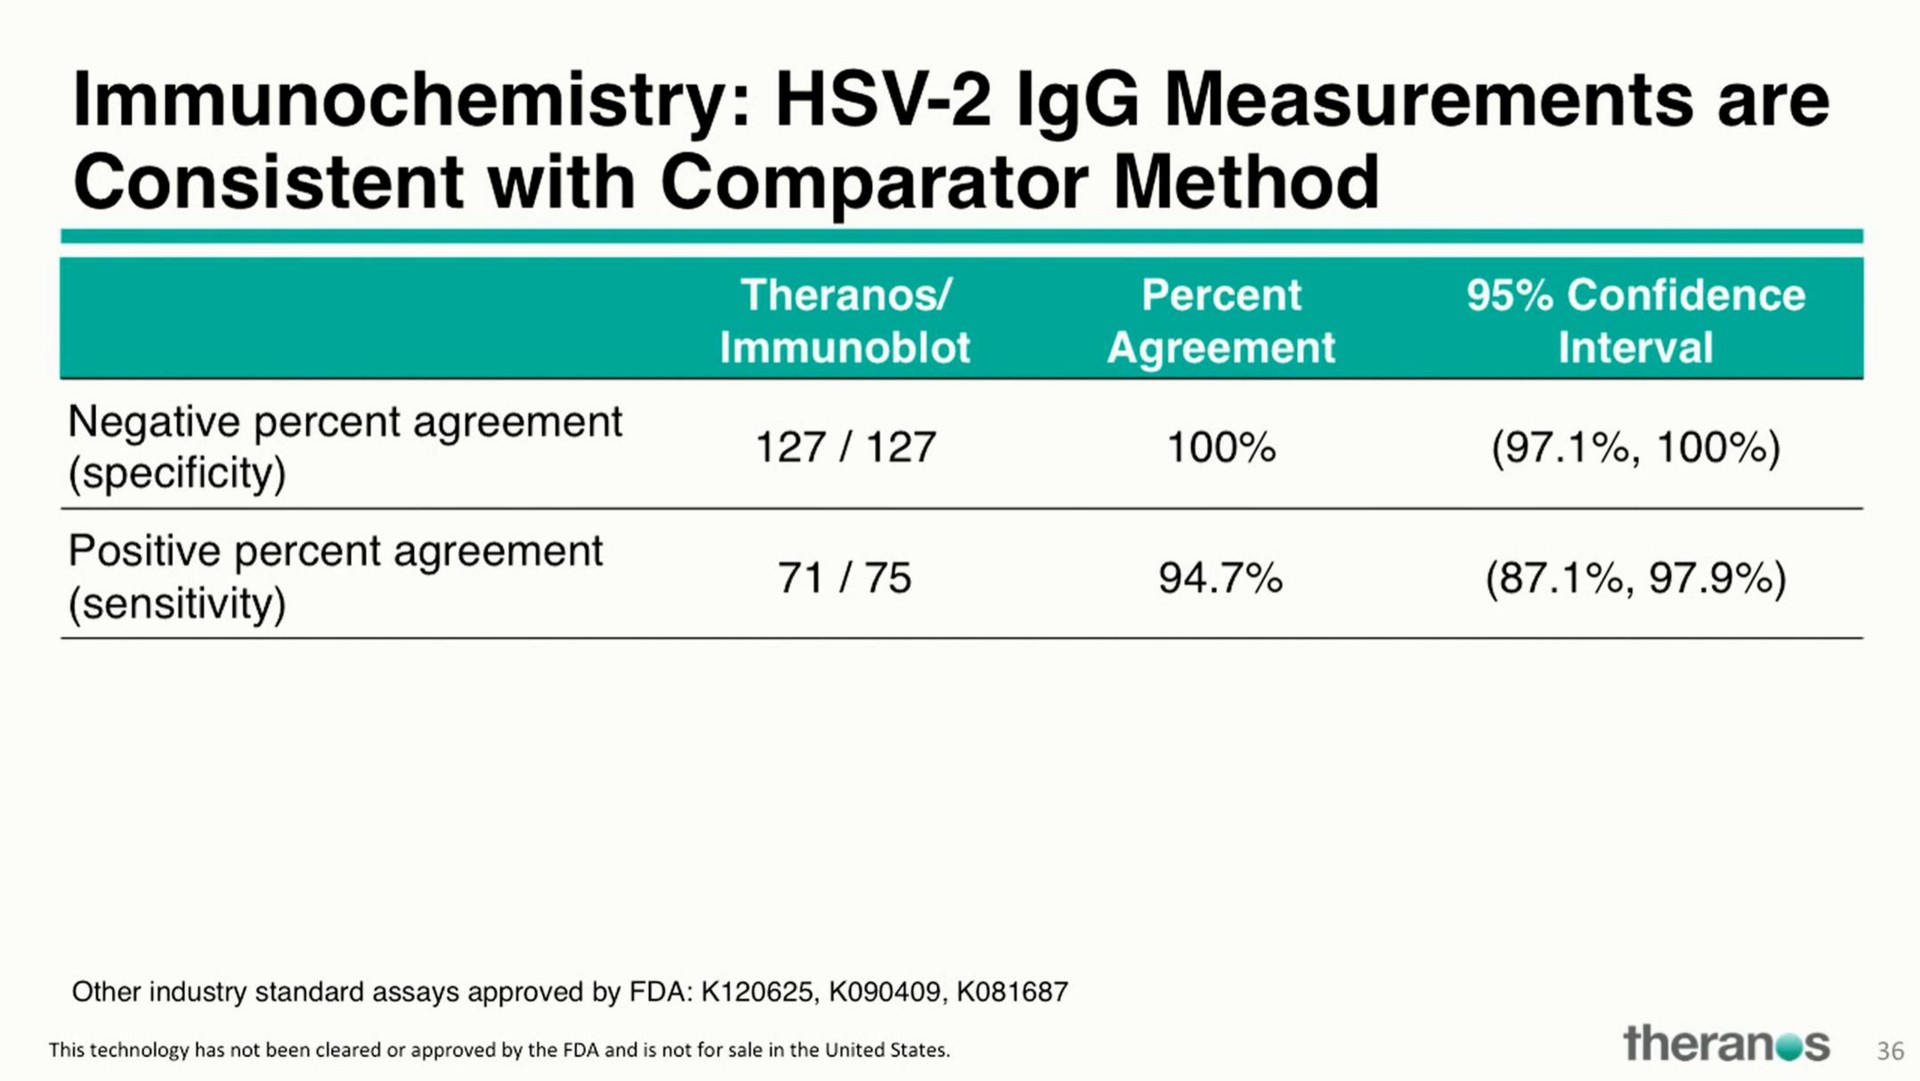 immunochemistry measurements are consistent with comparator method | Theranos